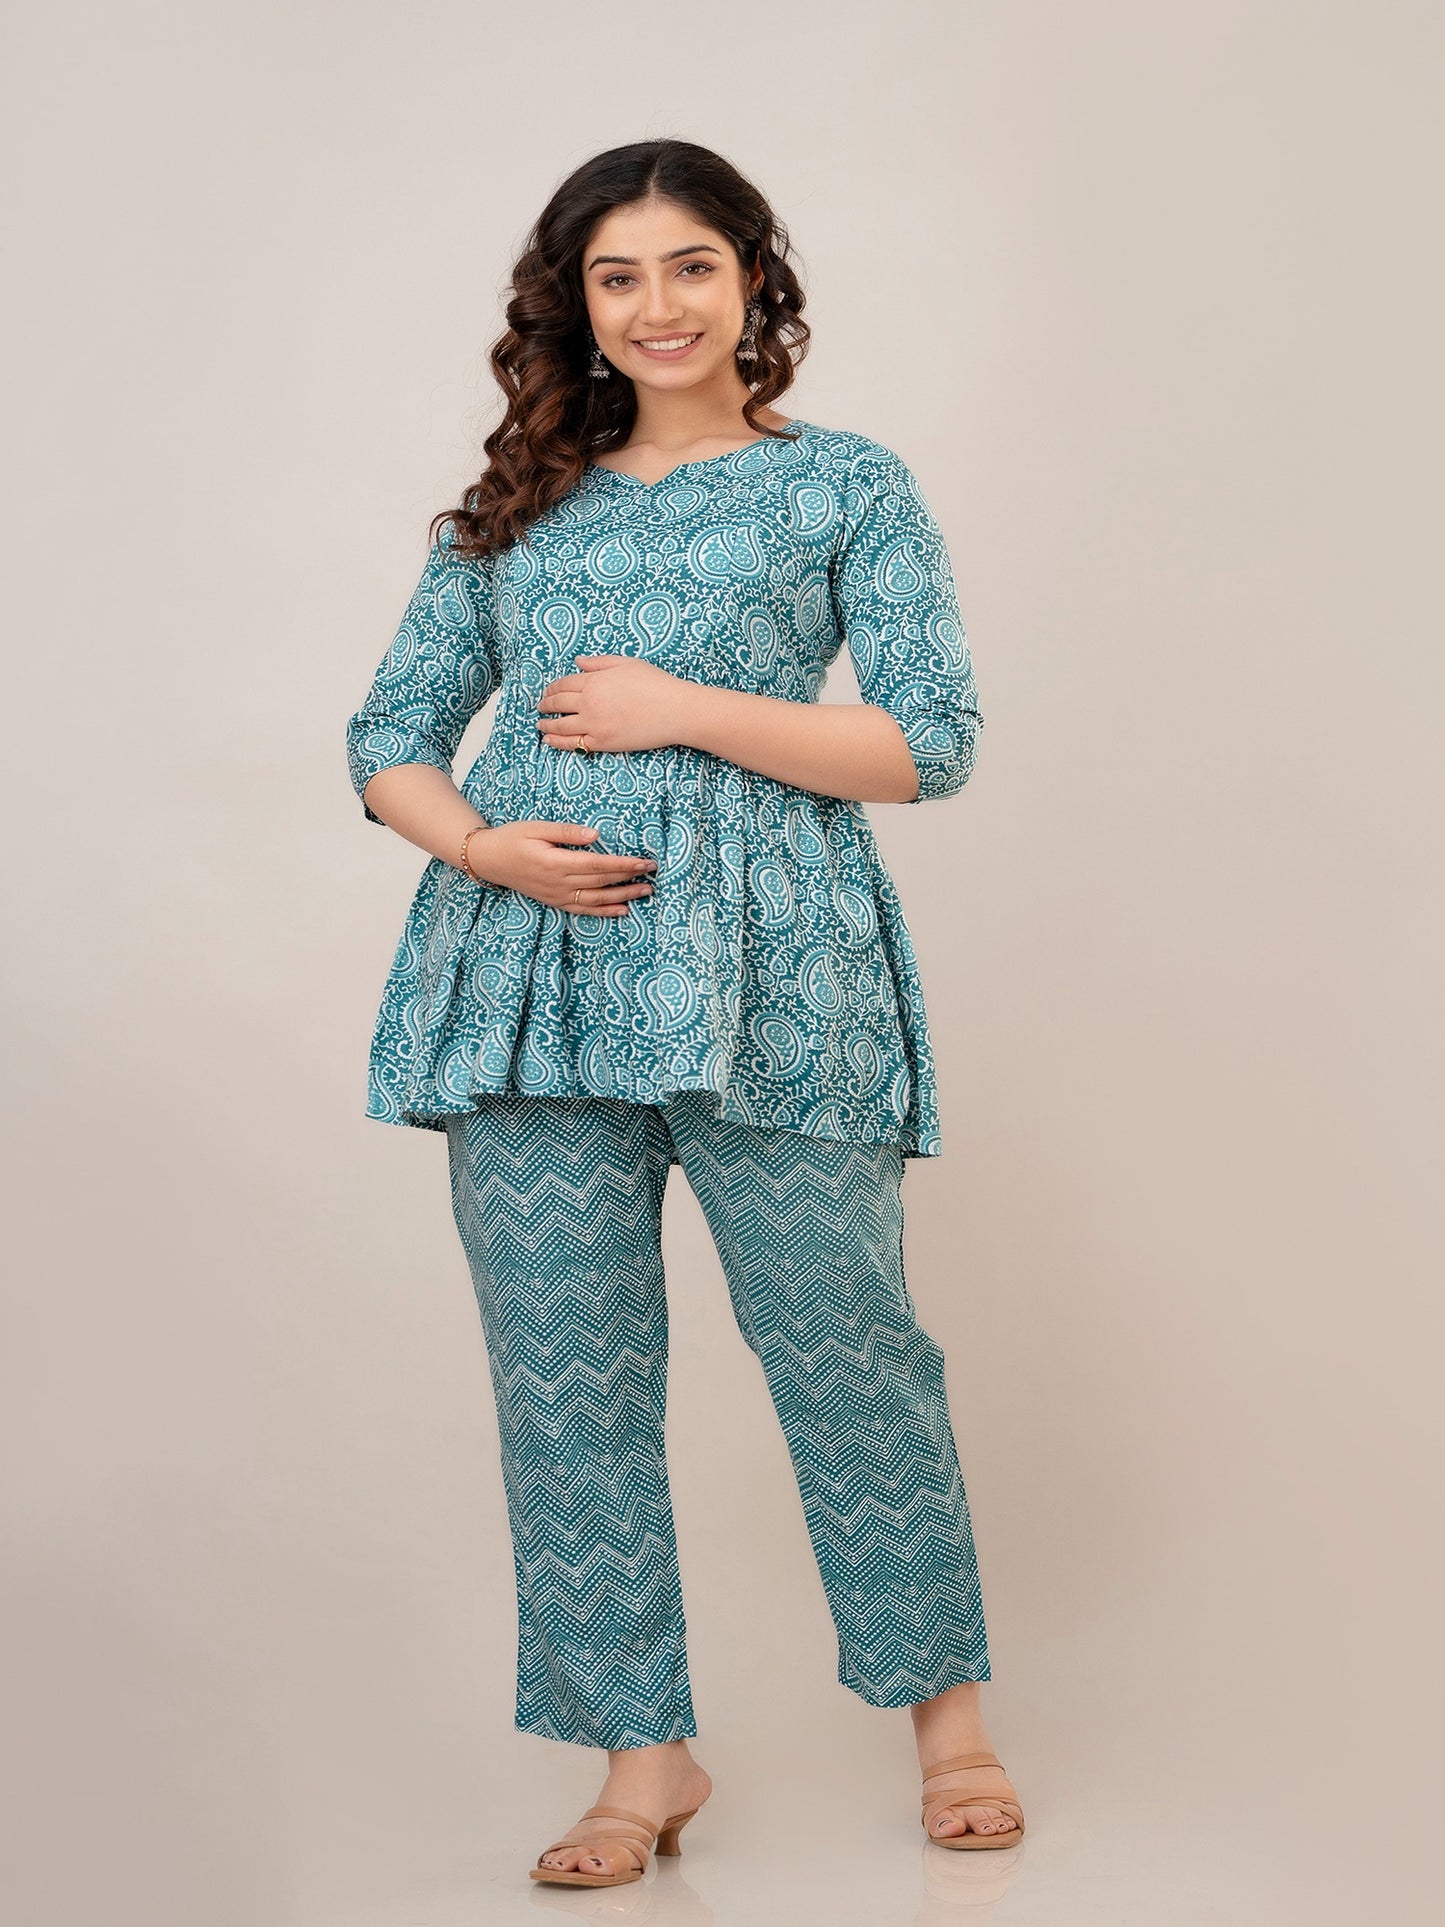 Women's Teal Paisley printed maternity top and pant set